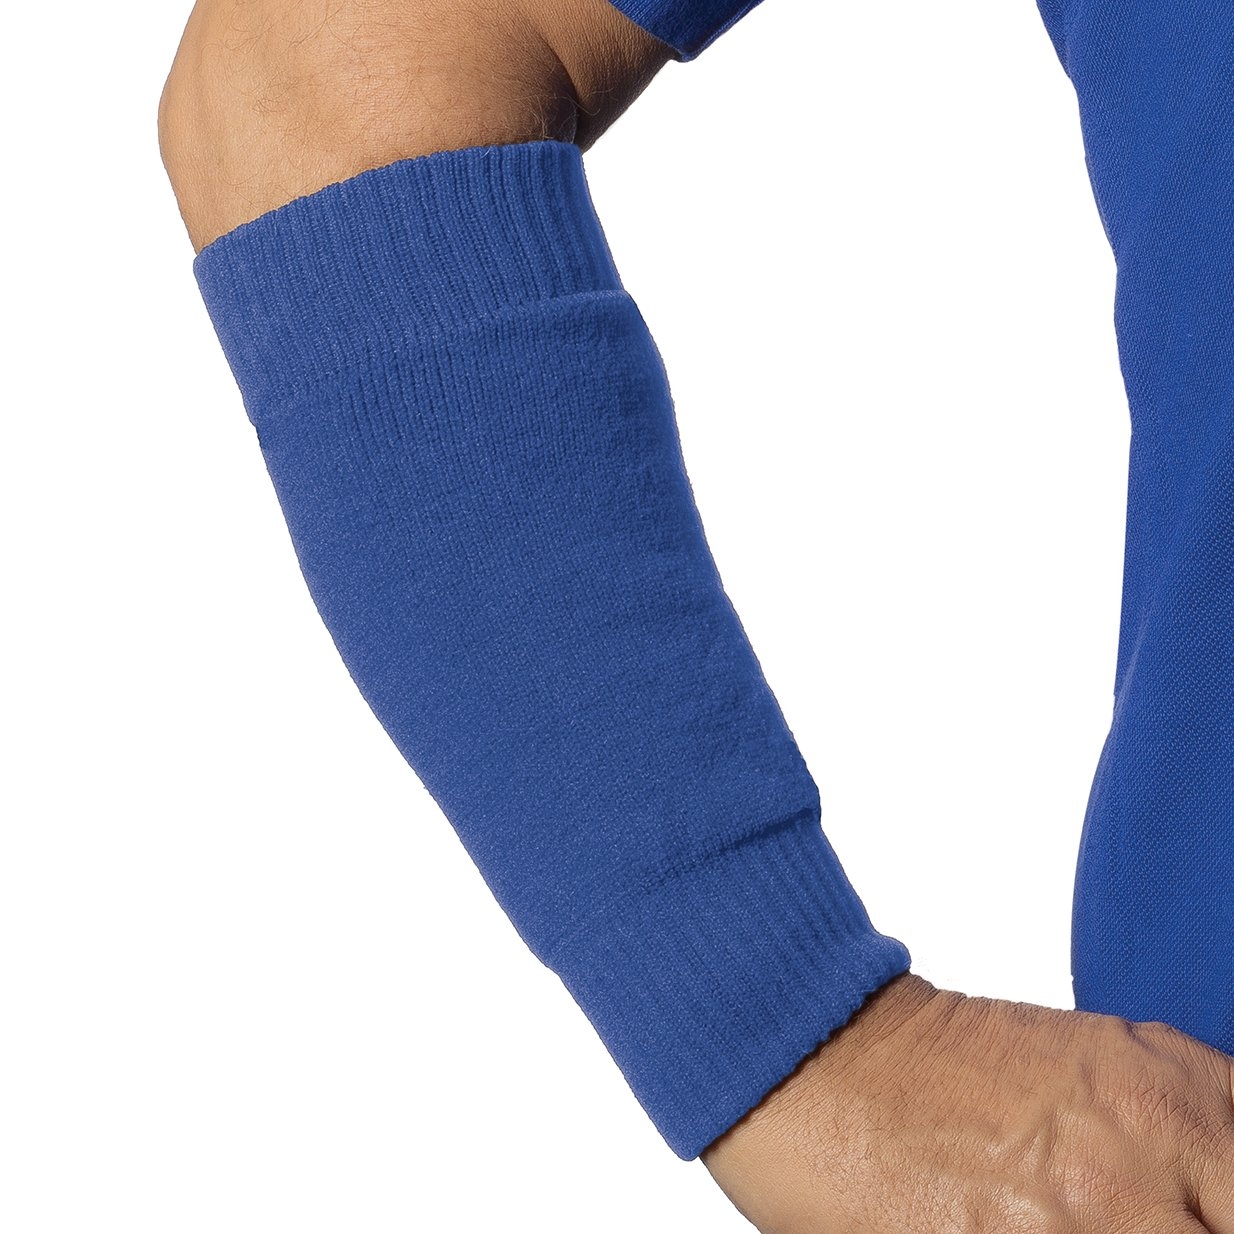 Forearm protectors for thin skin – Light Weight – Protect Frail Skin Royal Blue – Limb Keepers